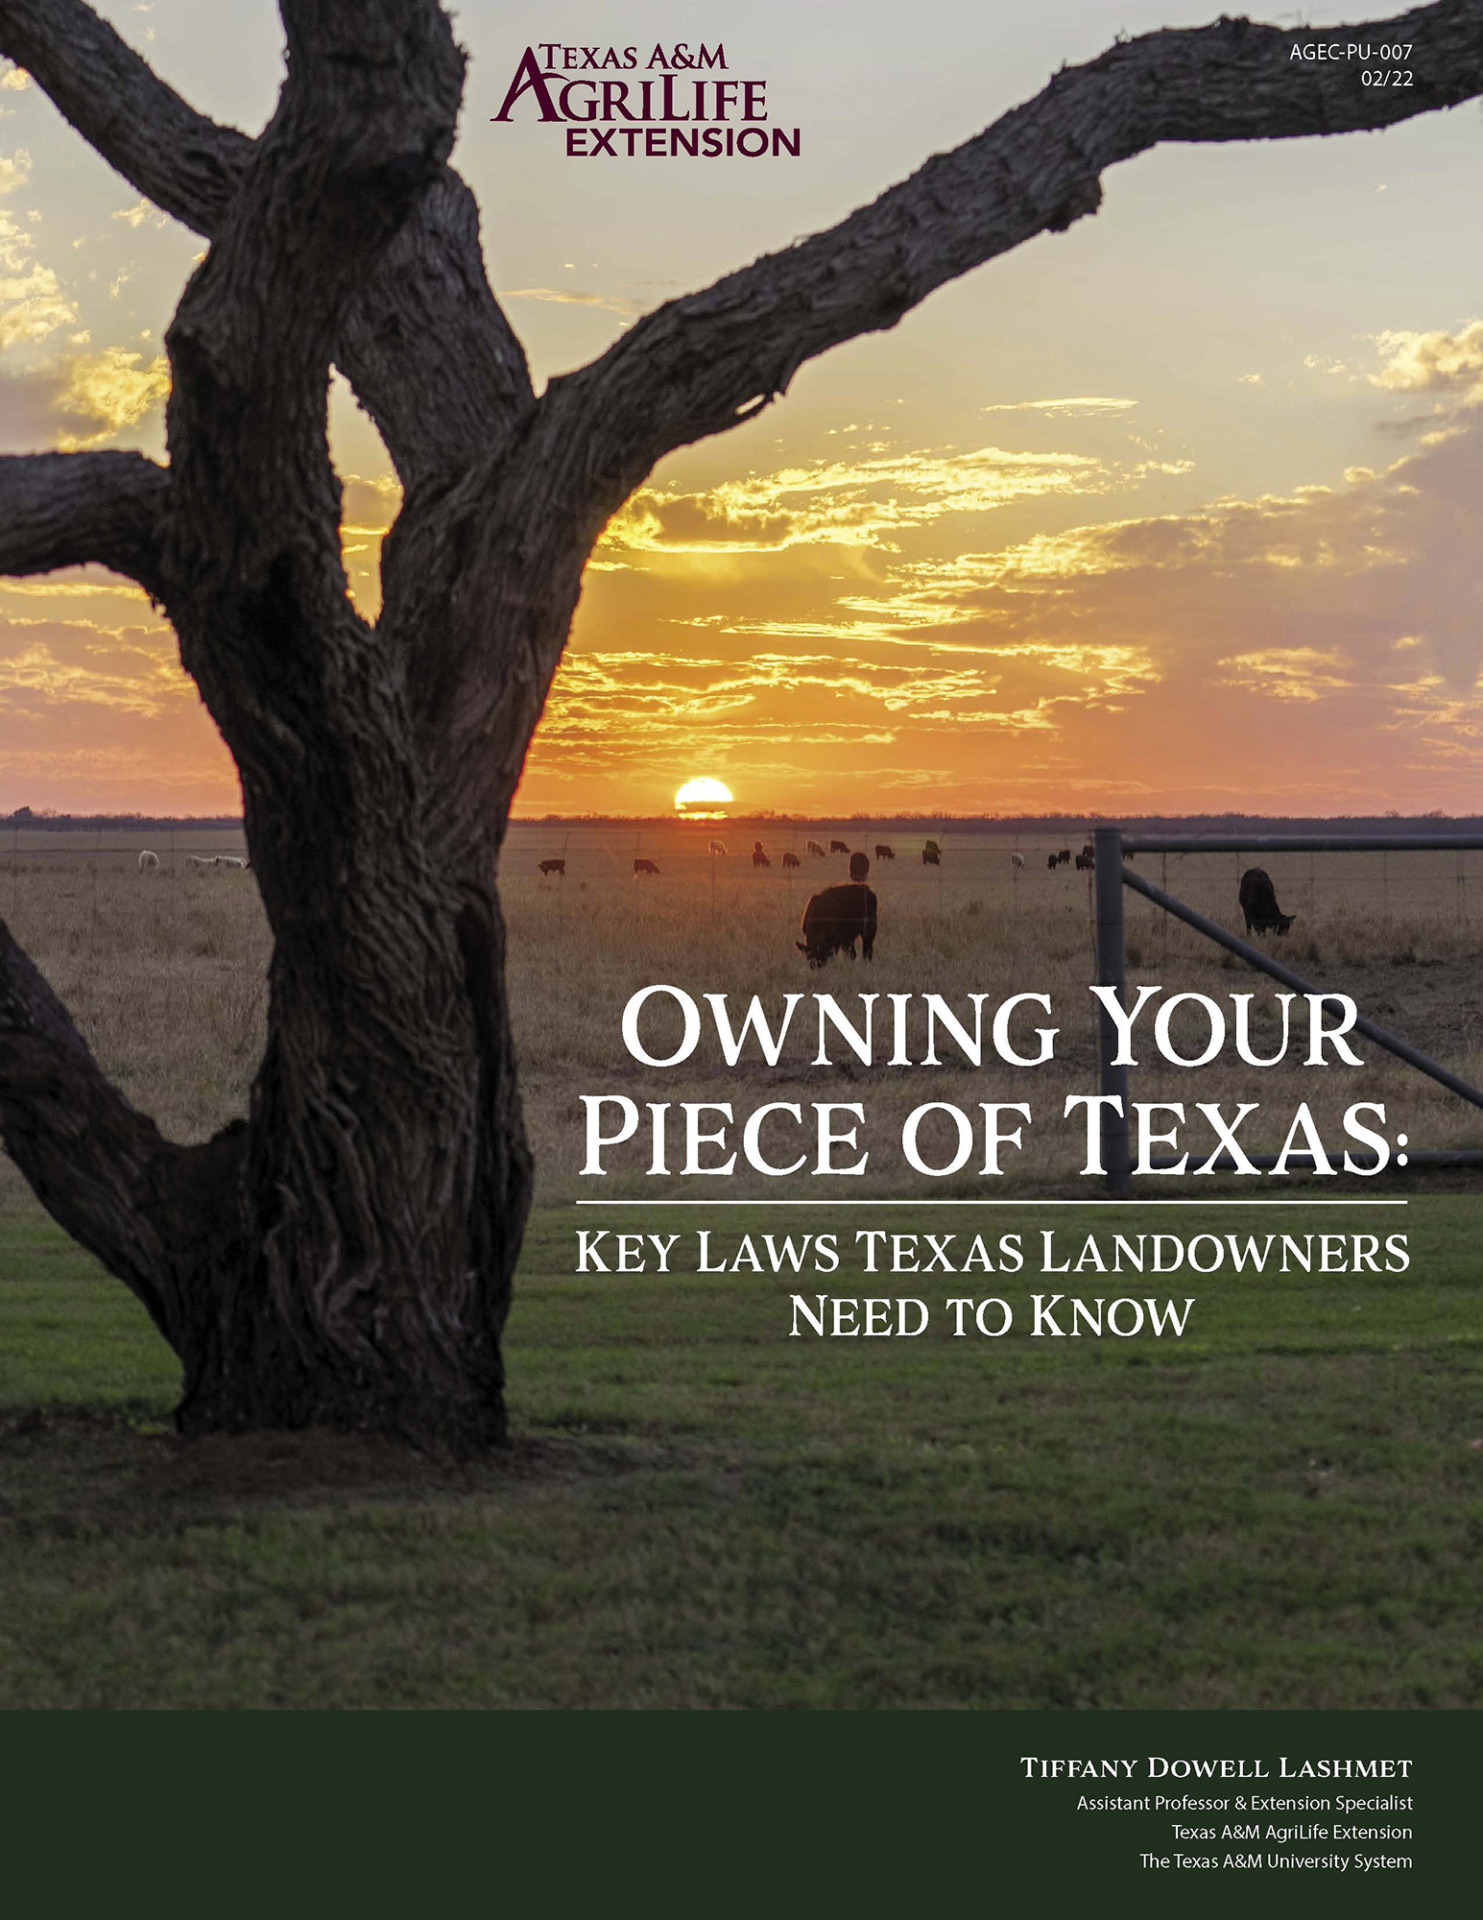 Hill Country landowners offered leasing, legal updates in September